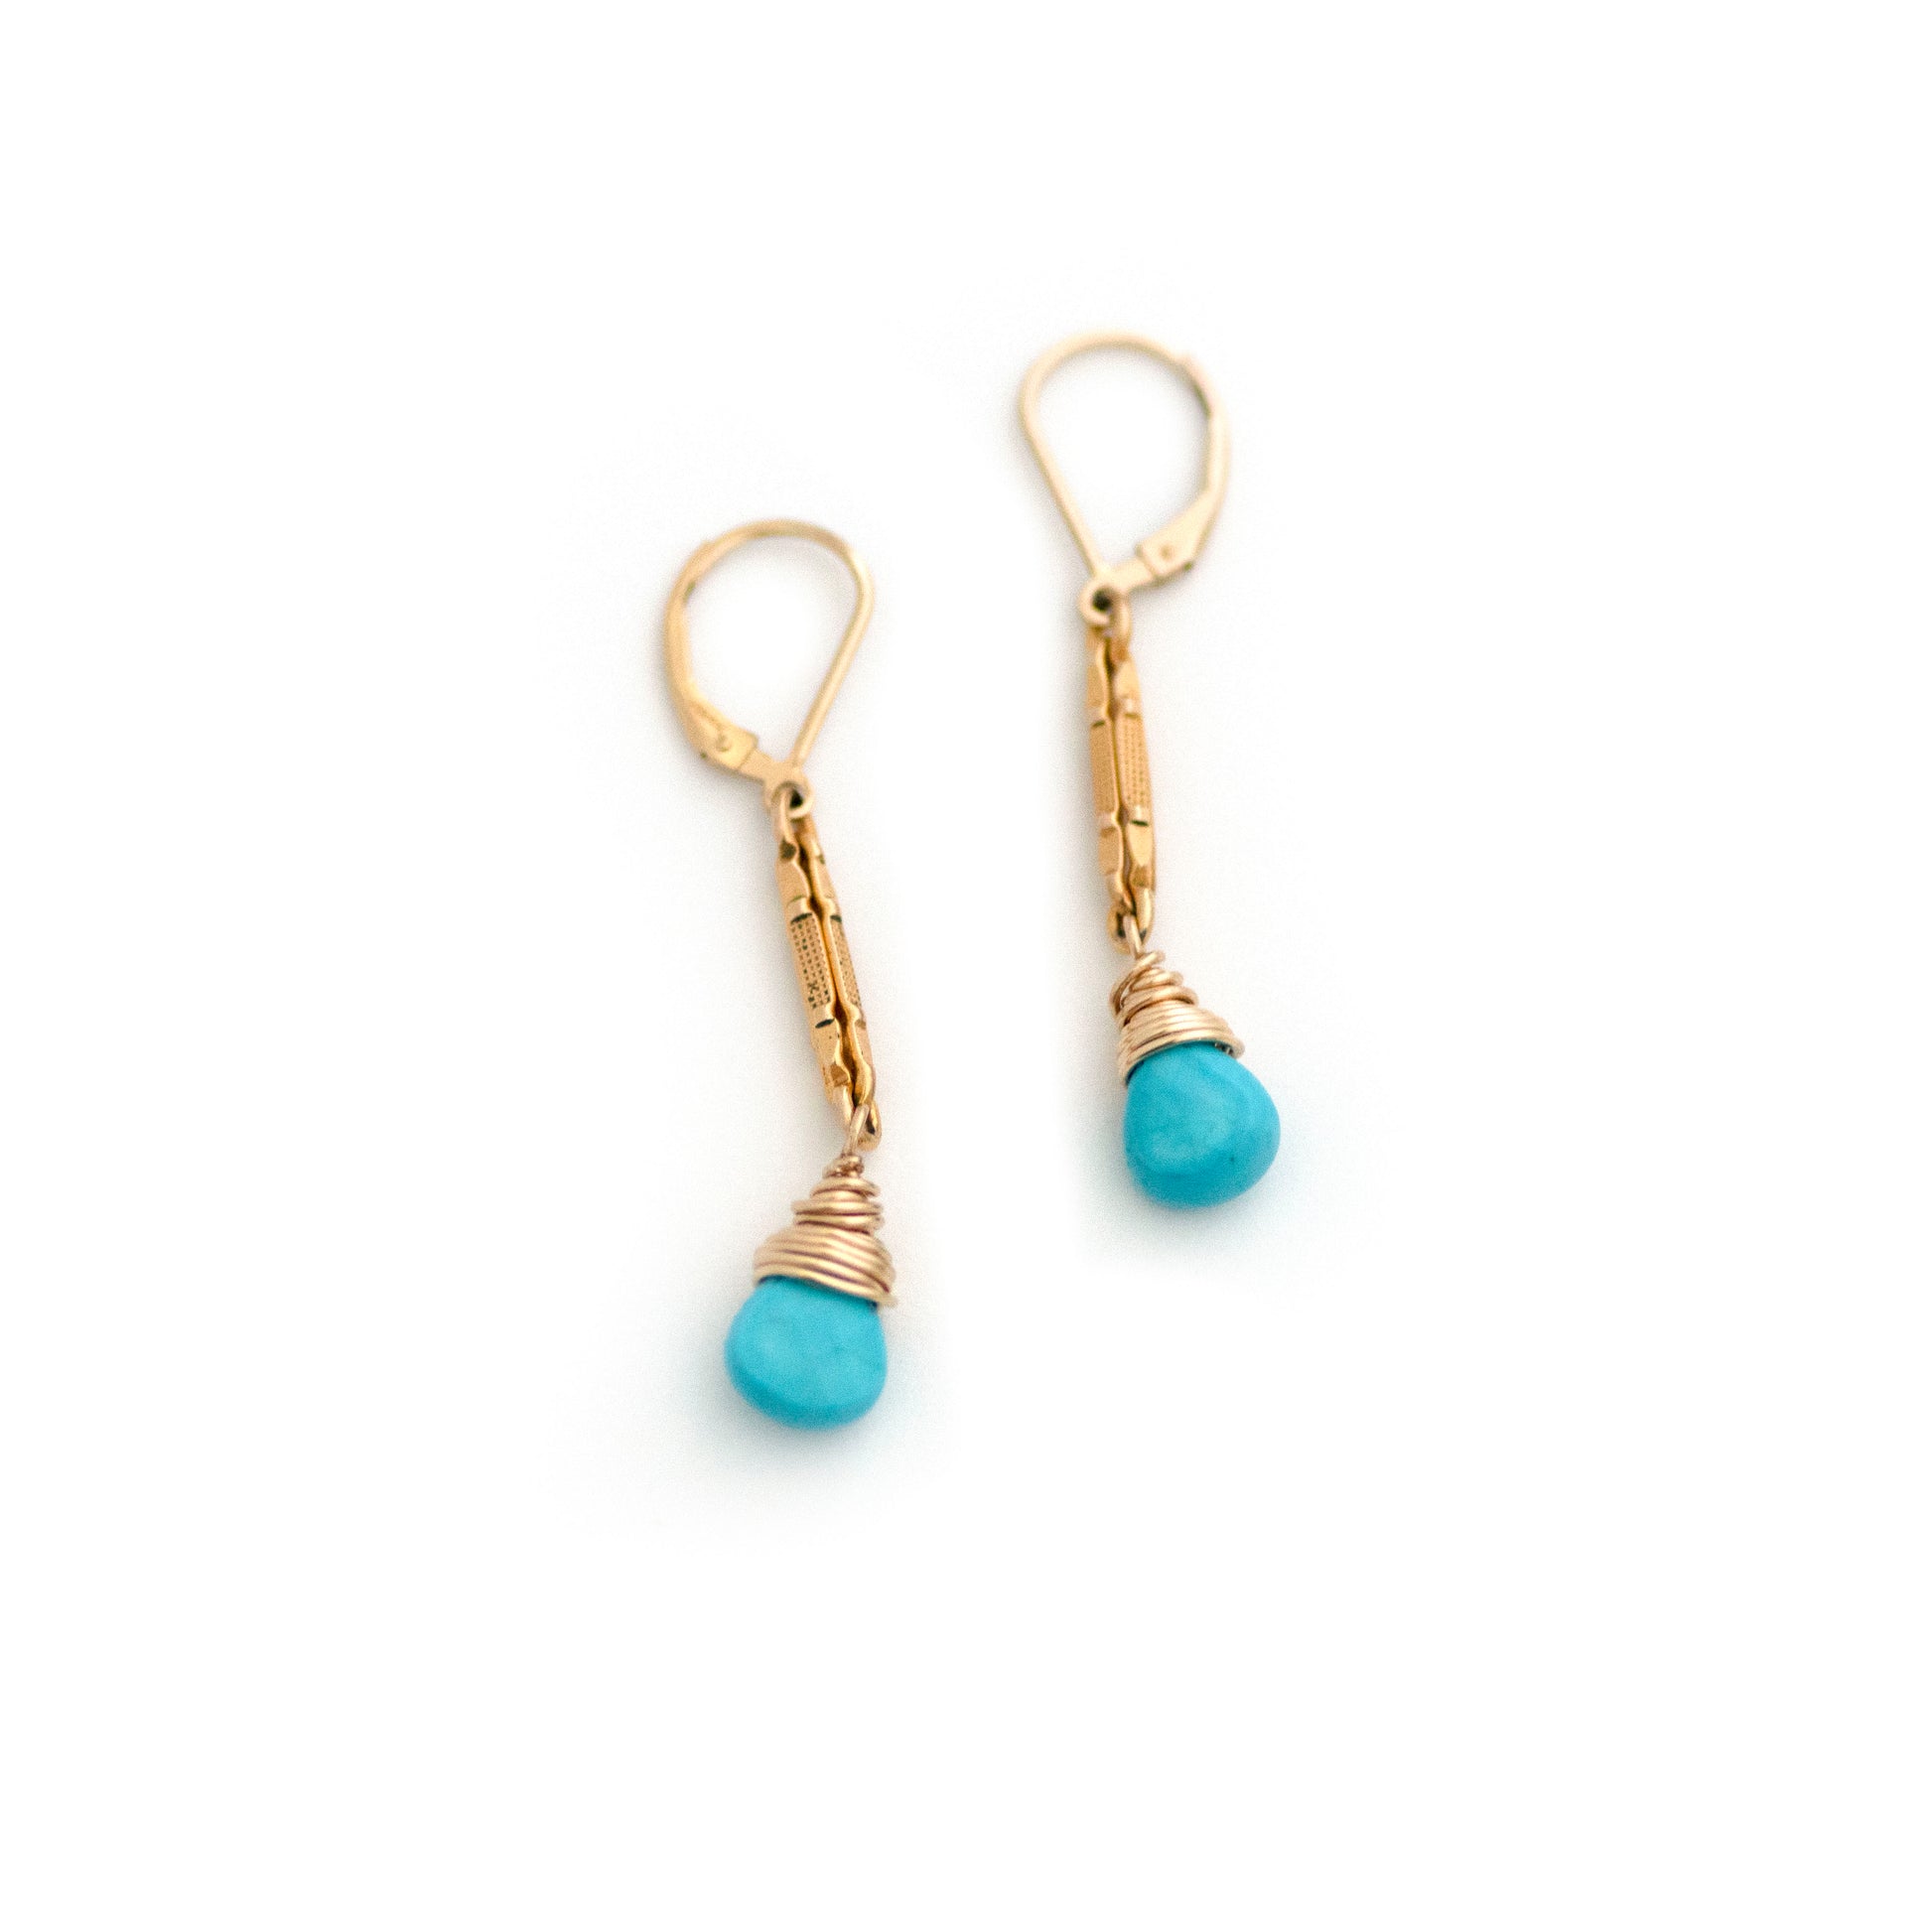 These one-of-a-kind conversion earrings are made up of:  Gold filled antique Victorian watch chain links from the late 1800s with hand tooled details. Arizona turquoise.